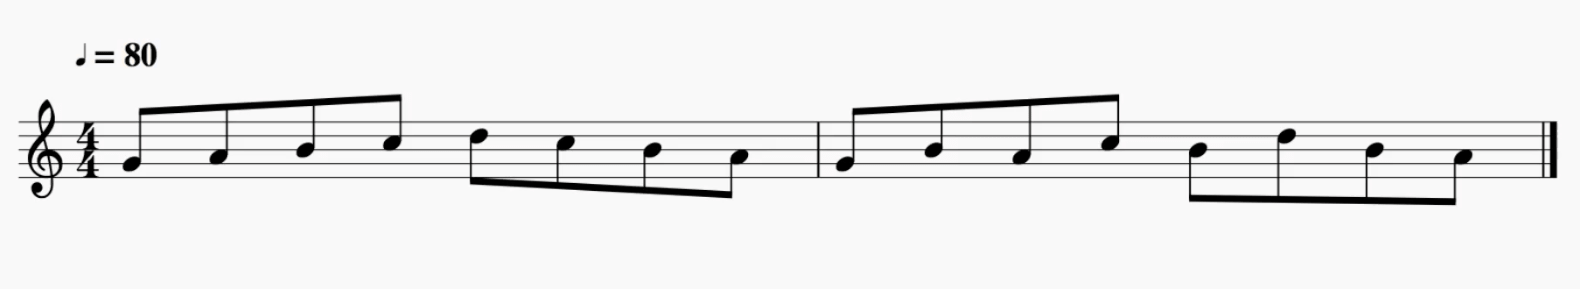 Eighth notes: note values